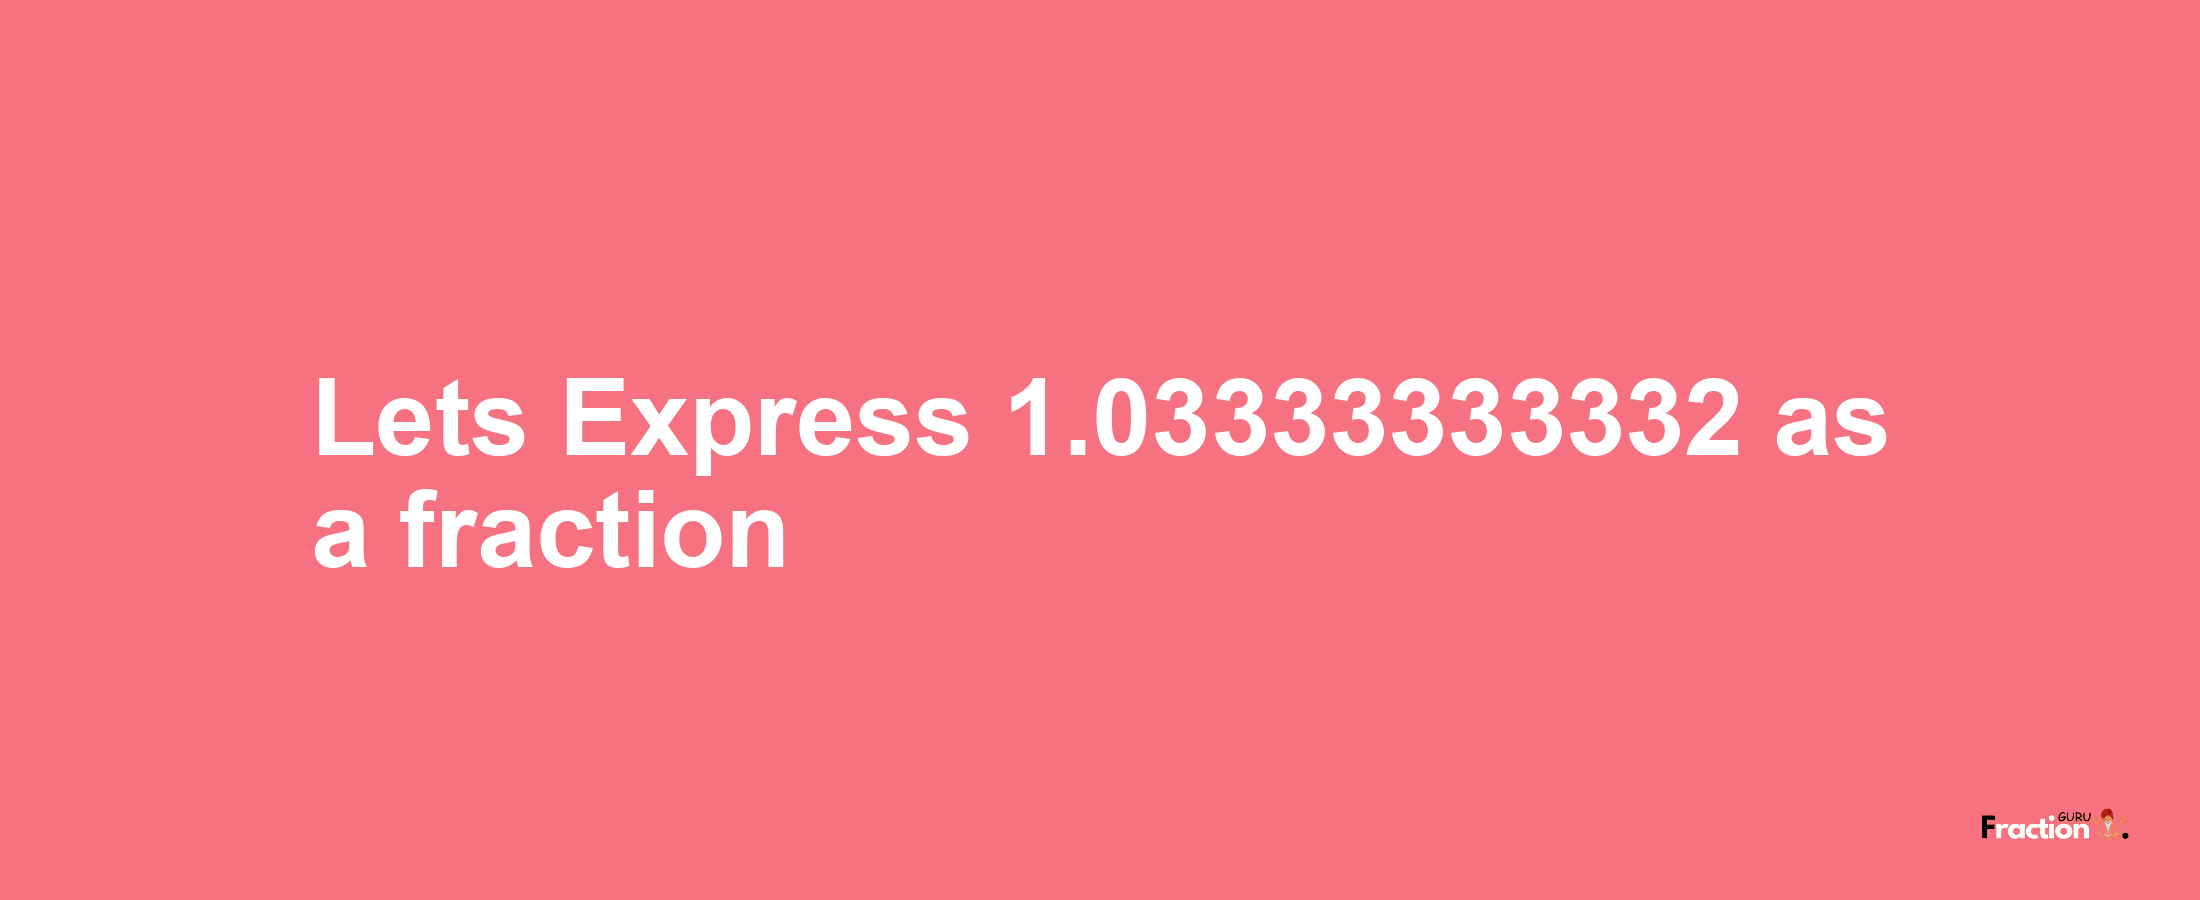 Lets Express 1.03333333332 as afraction